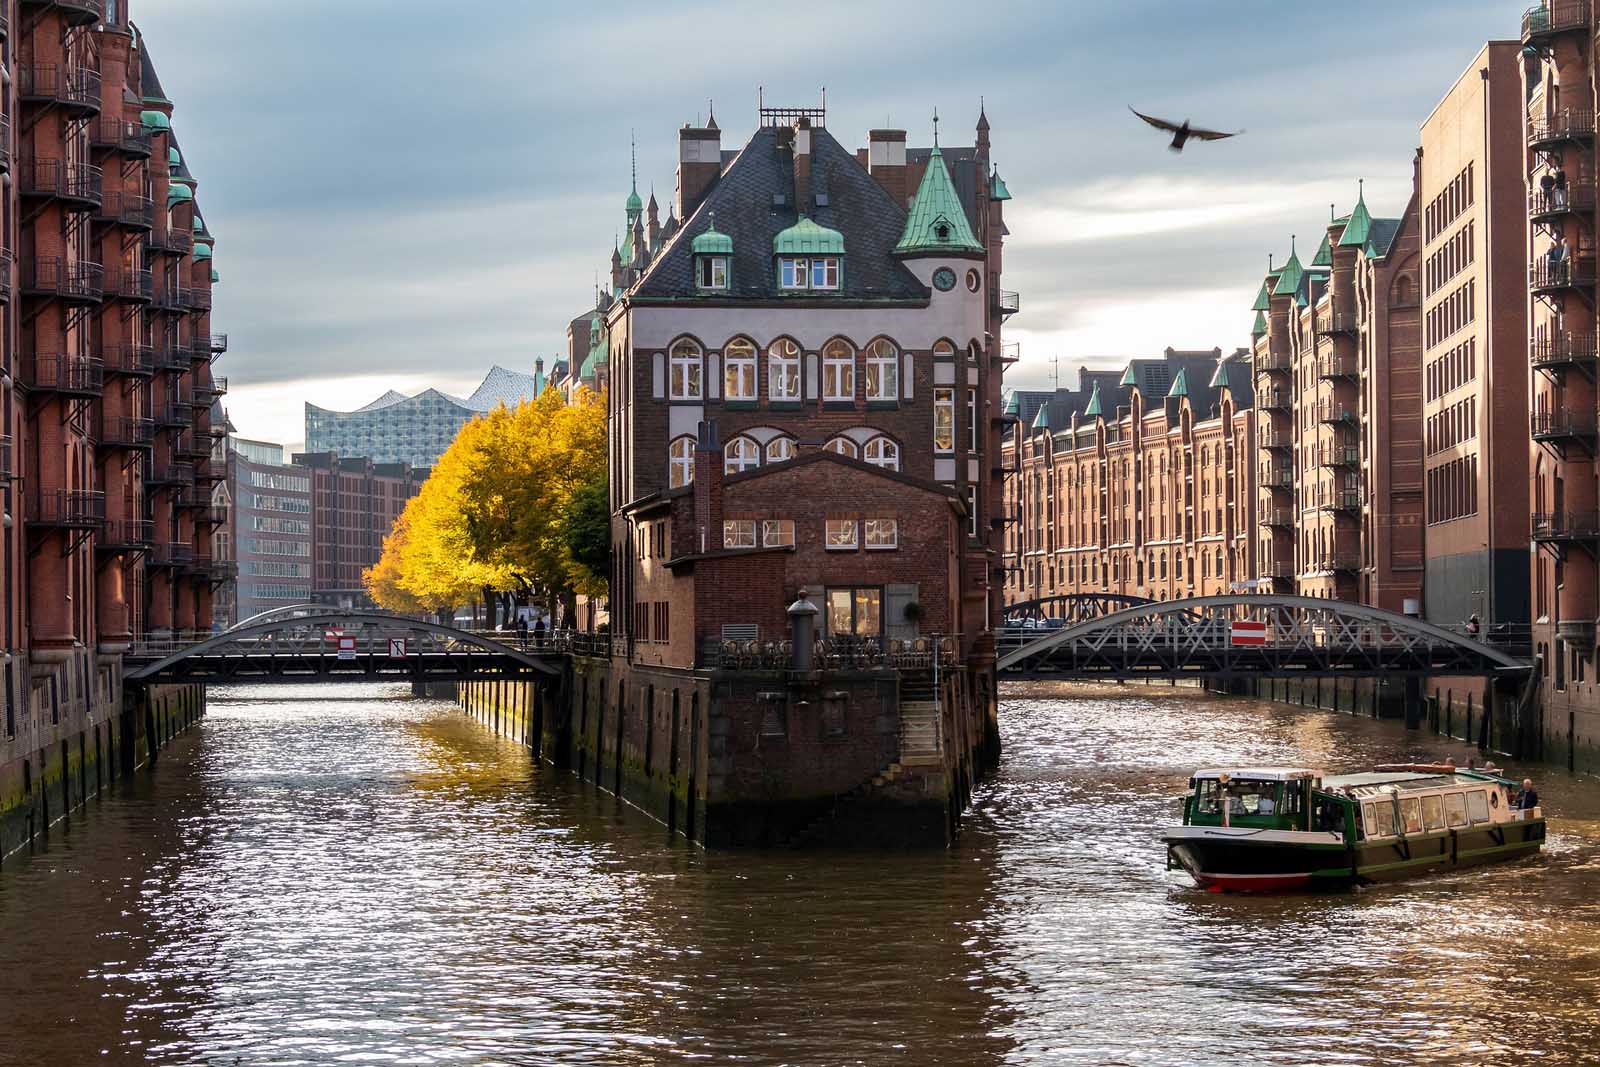 Hamburg is one of the largest cities in Germany